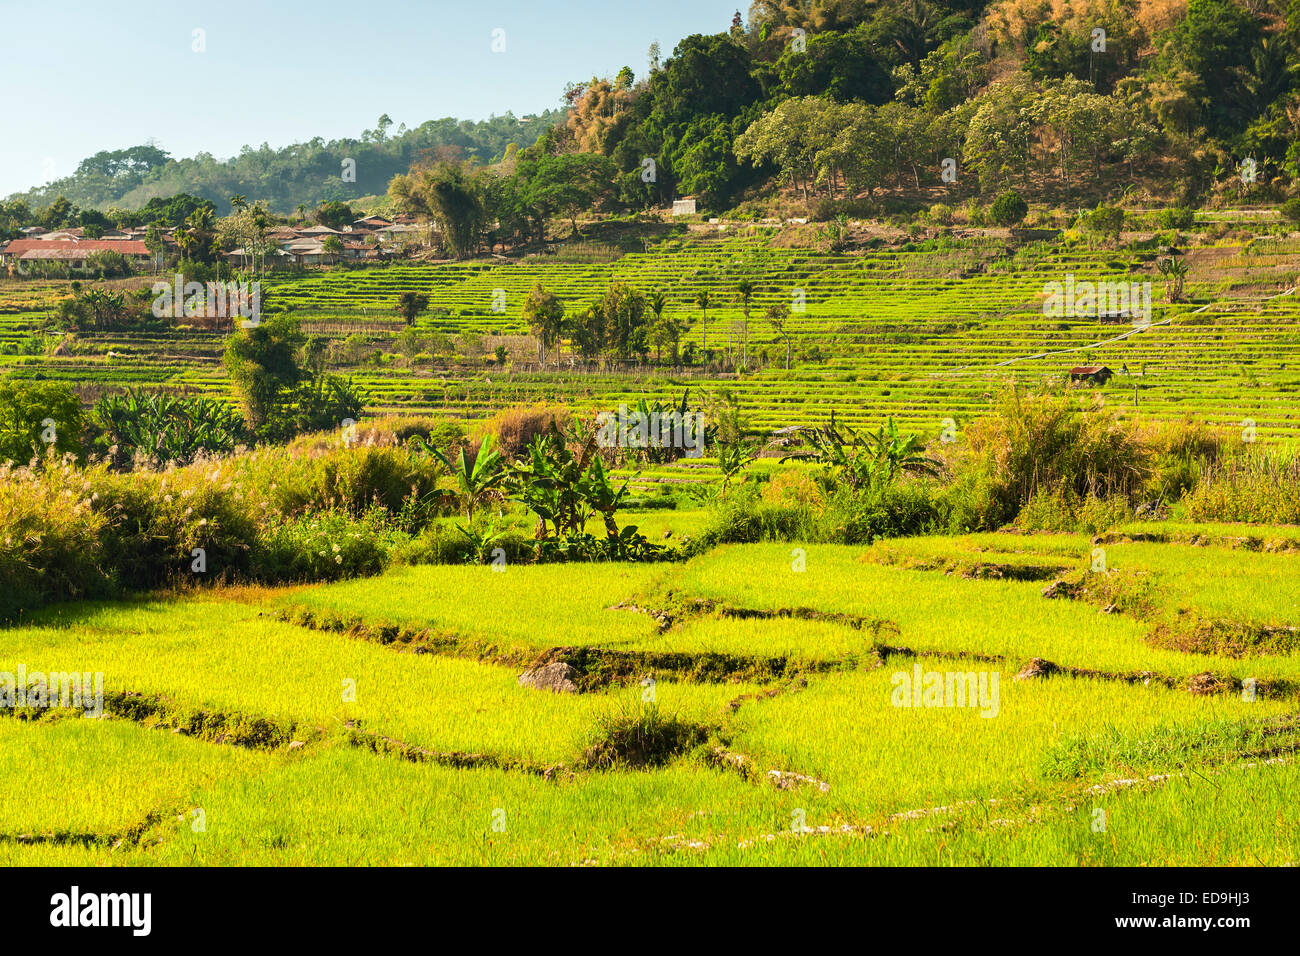 Terraced rice paddies near the town of Moni on the island of Flores in Indonesia. Stock Photo